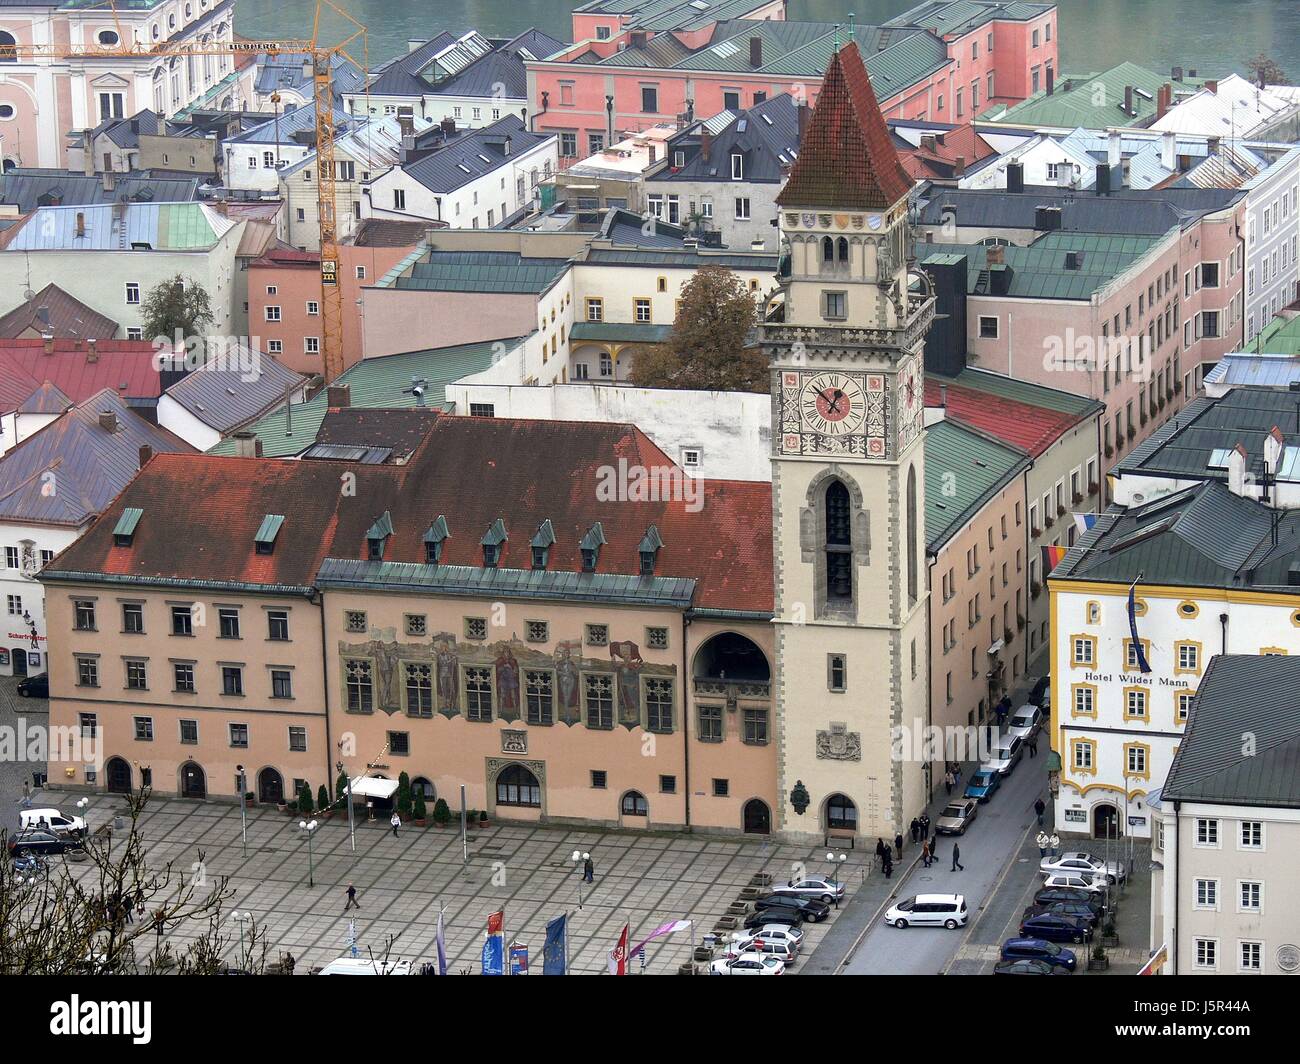 Nibelungen Hall High Resolution Stock Photography and Images - Alamy